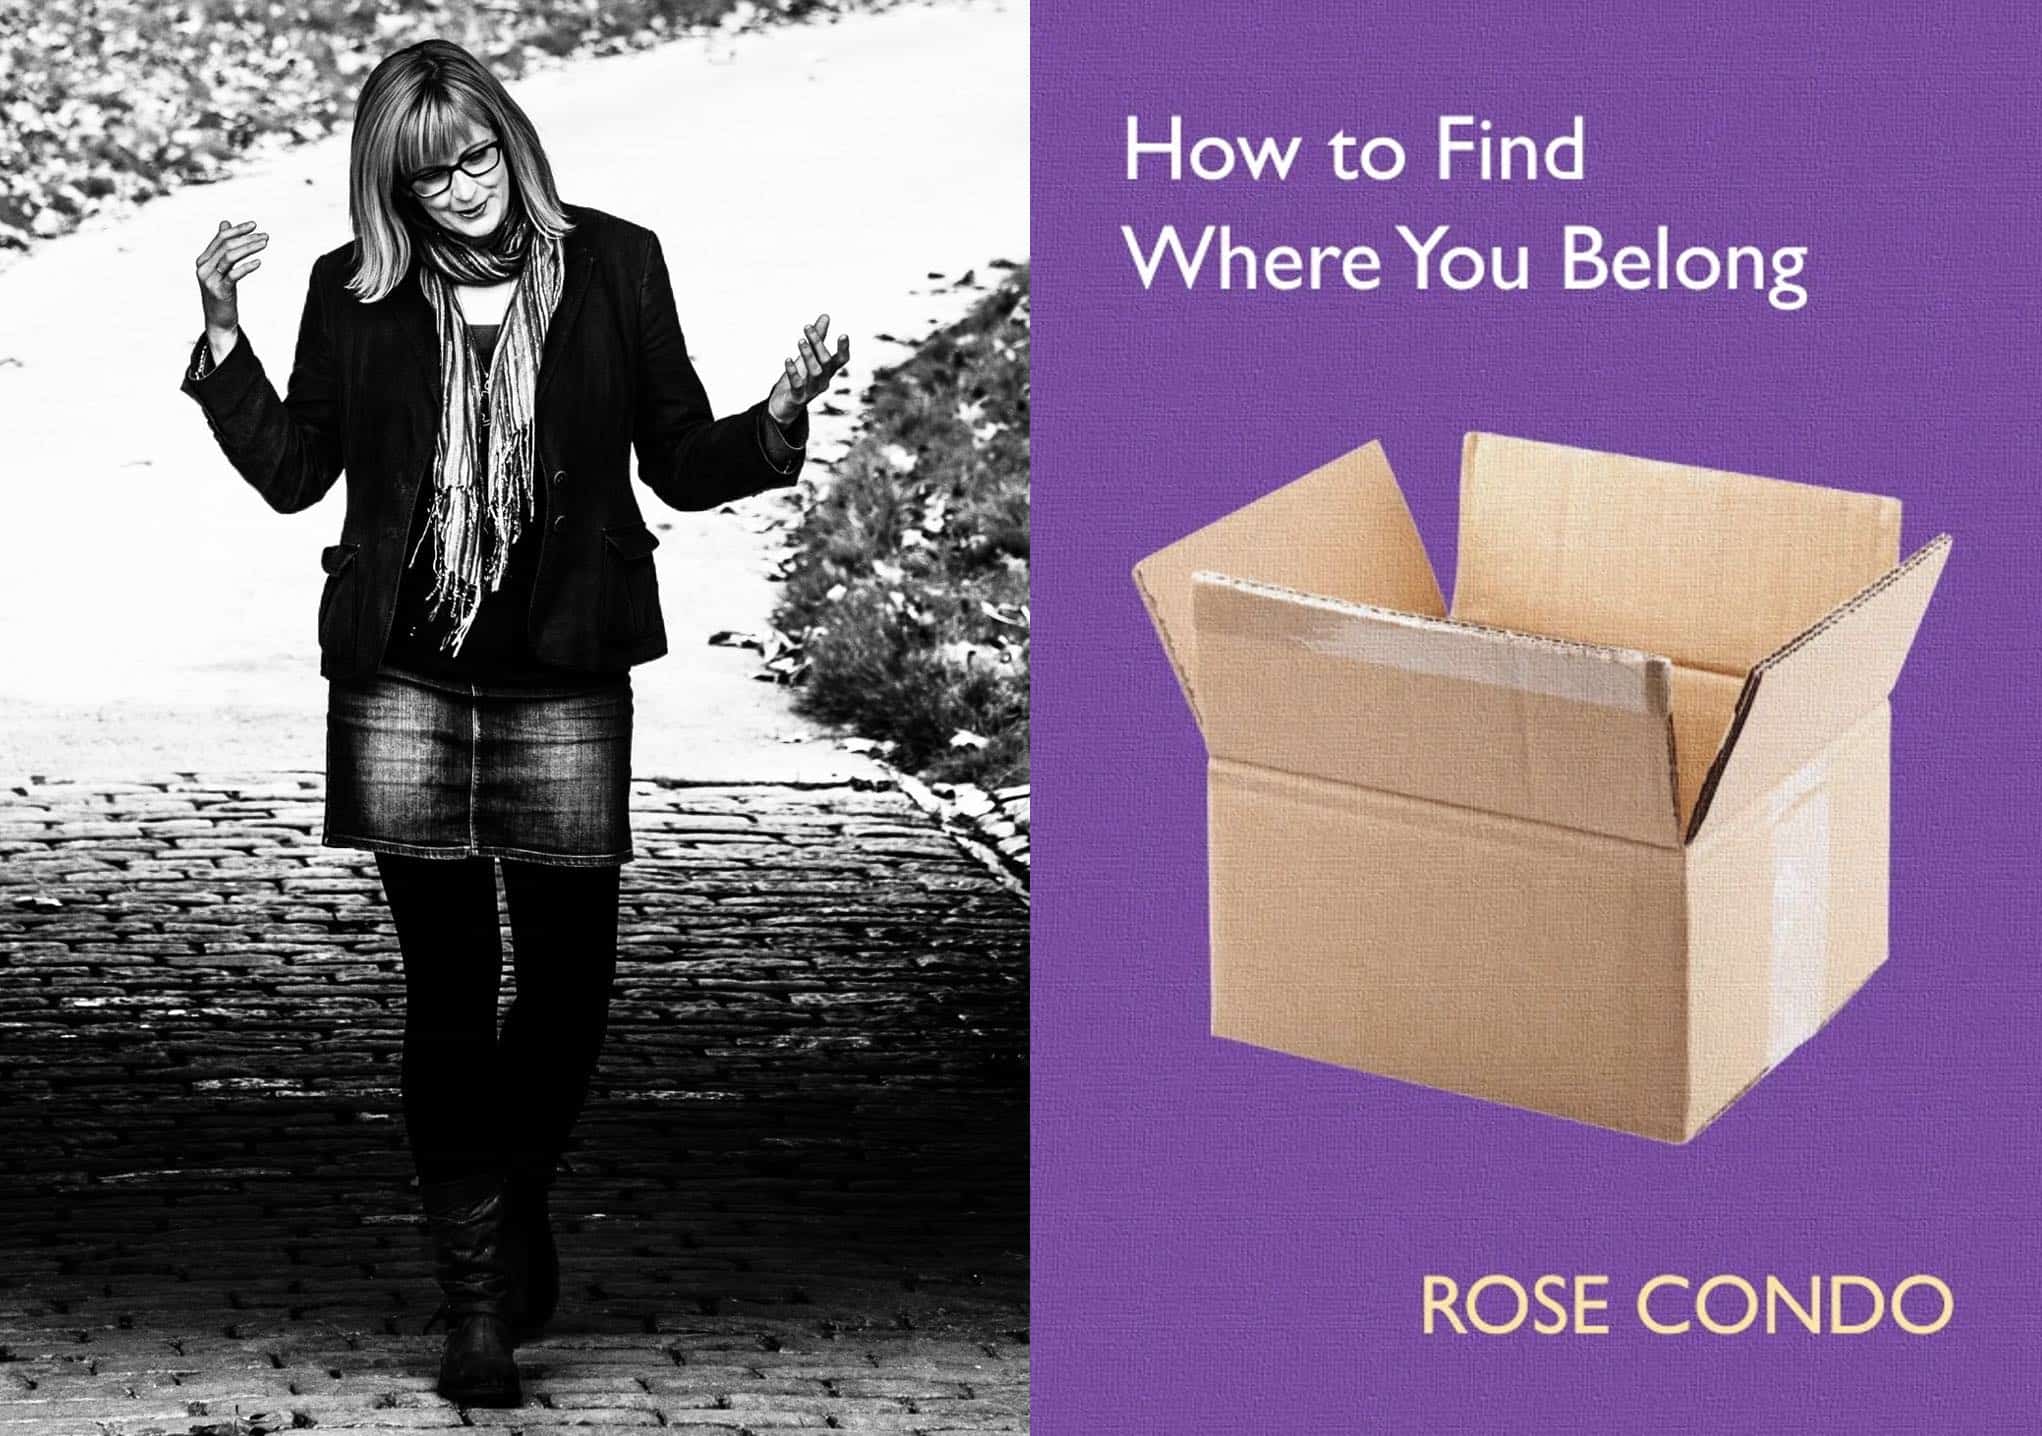 Rose Condo – How to Find Where You Belong – Hybrid Event